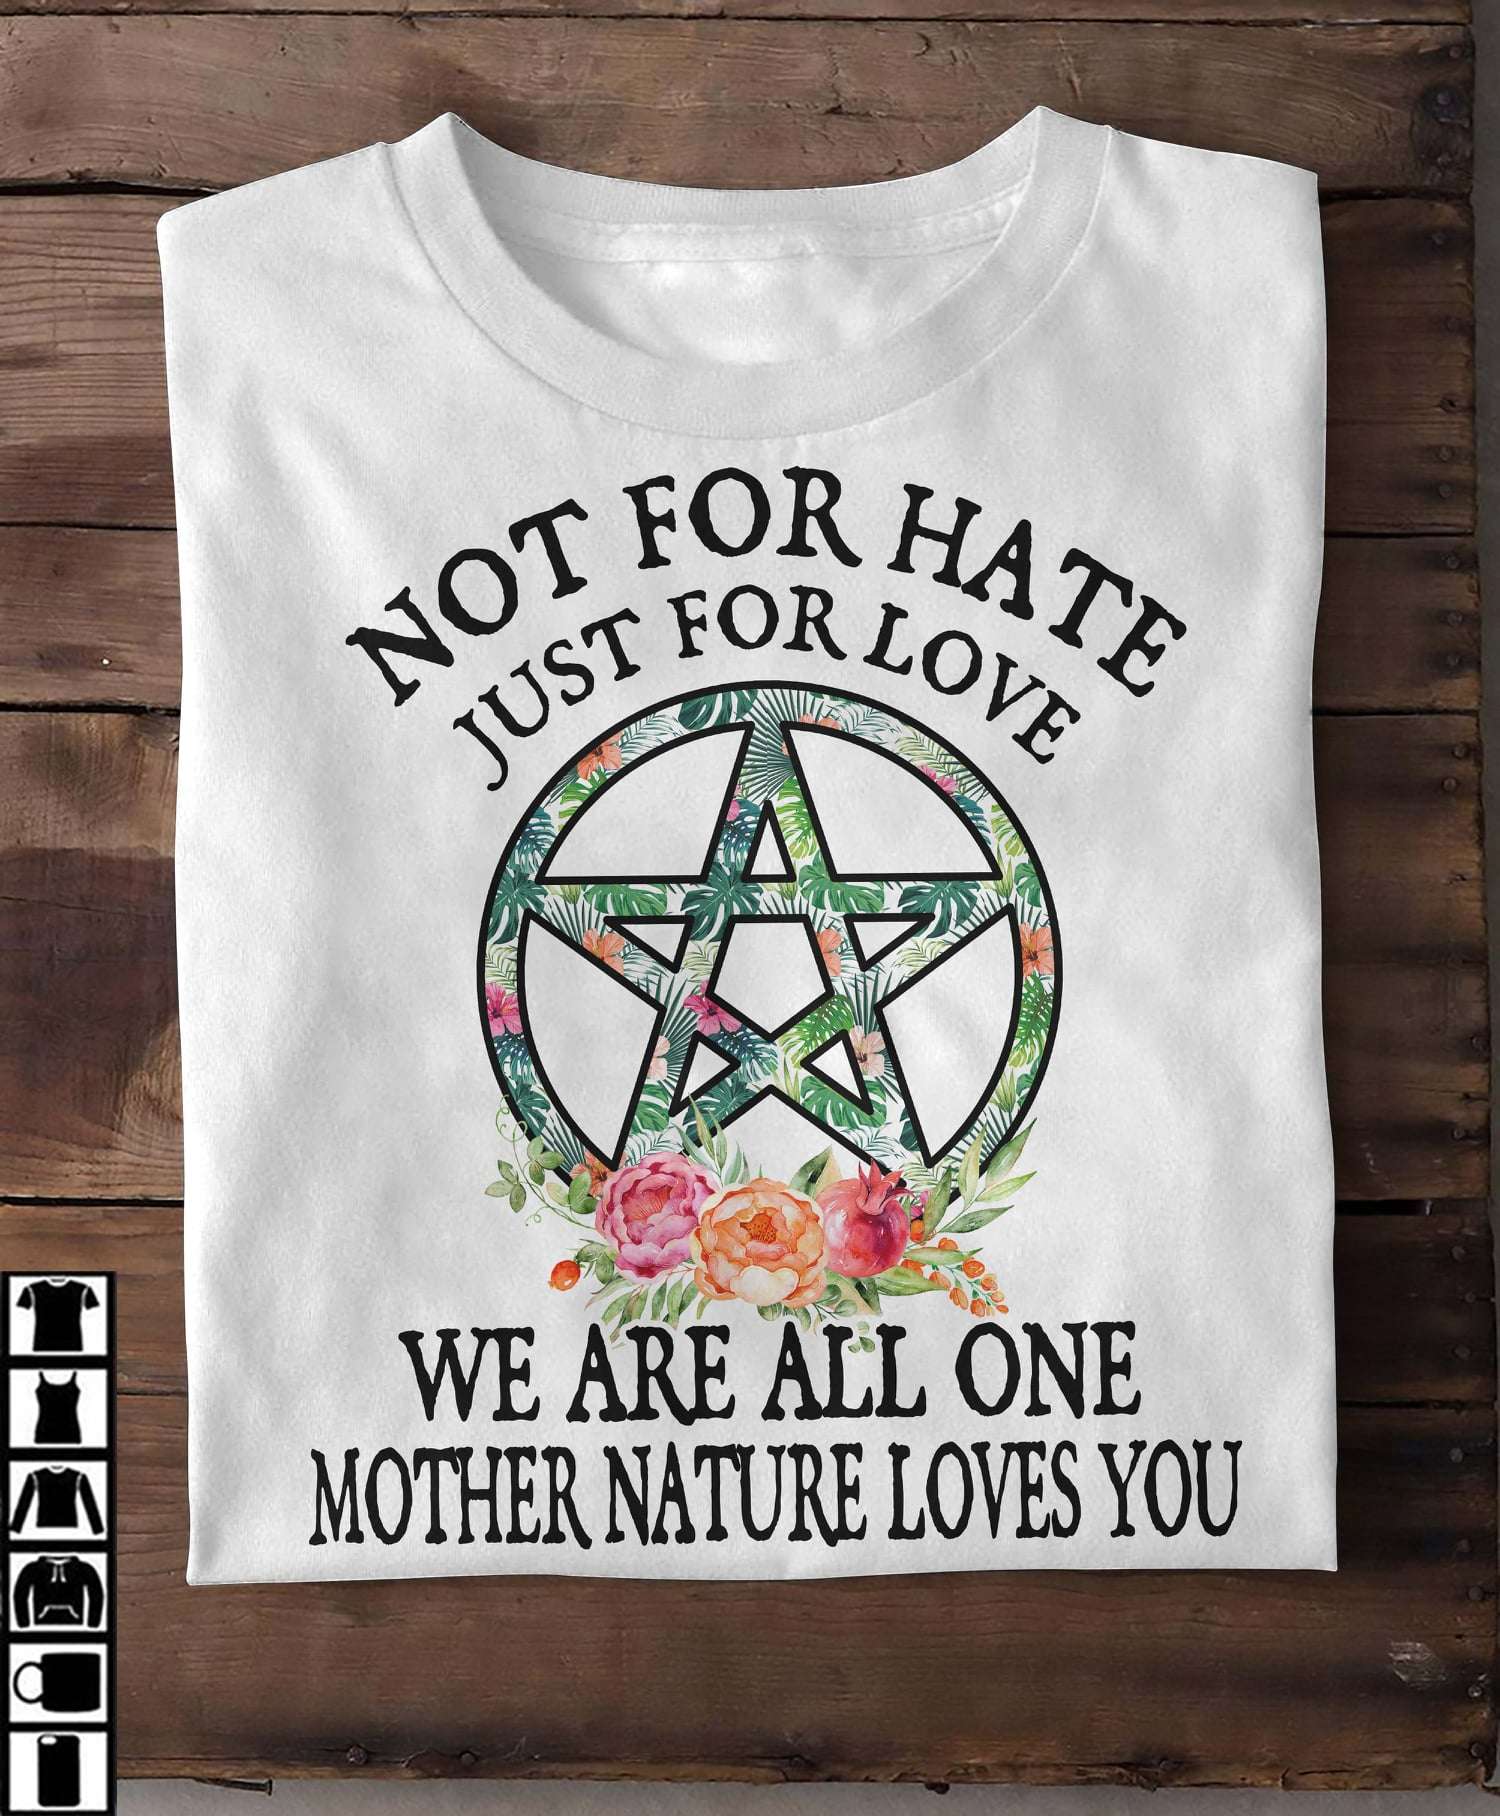 Not for hate just for love we are all one mother nature loves you